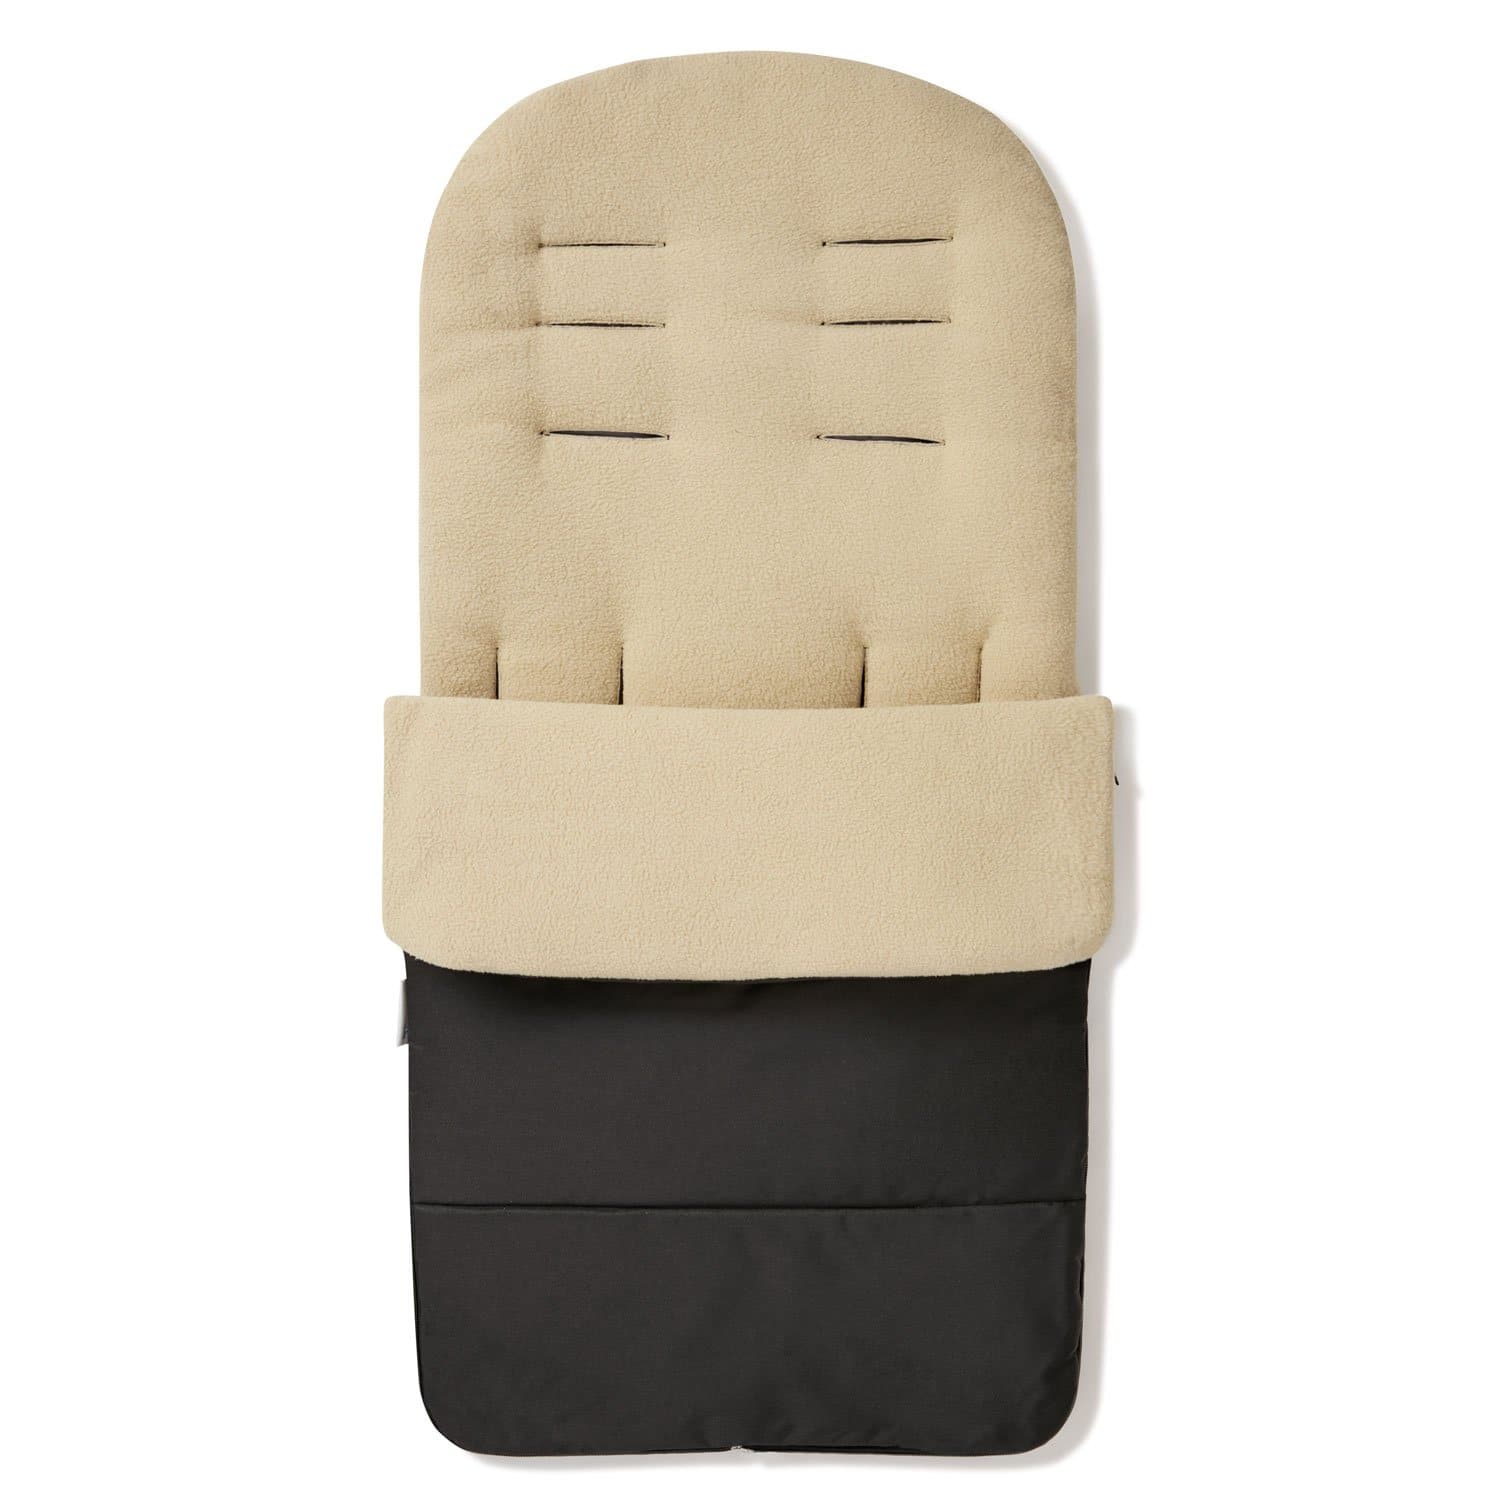 Premium Footmuff / Cosy Toes Compatible with Combi - For Your Little One